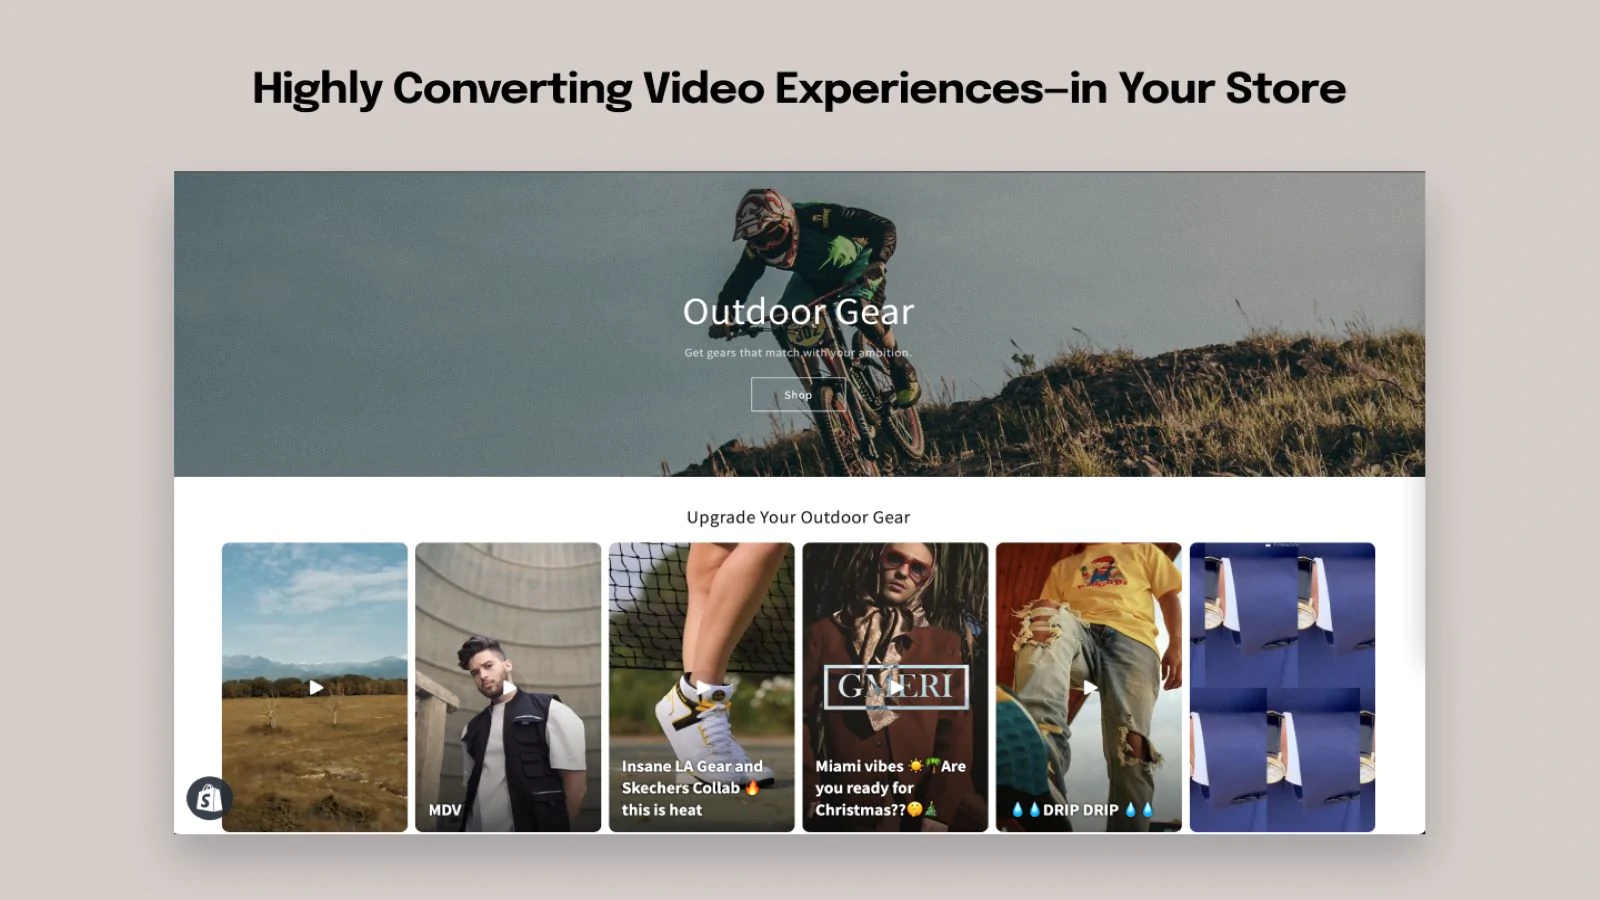 Highly Converting Video Experiences in Your Store